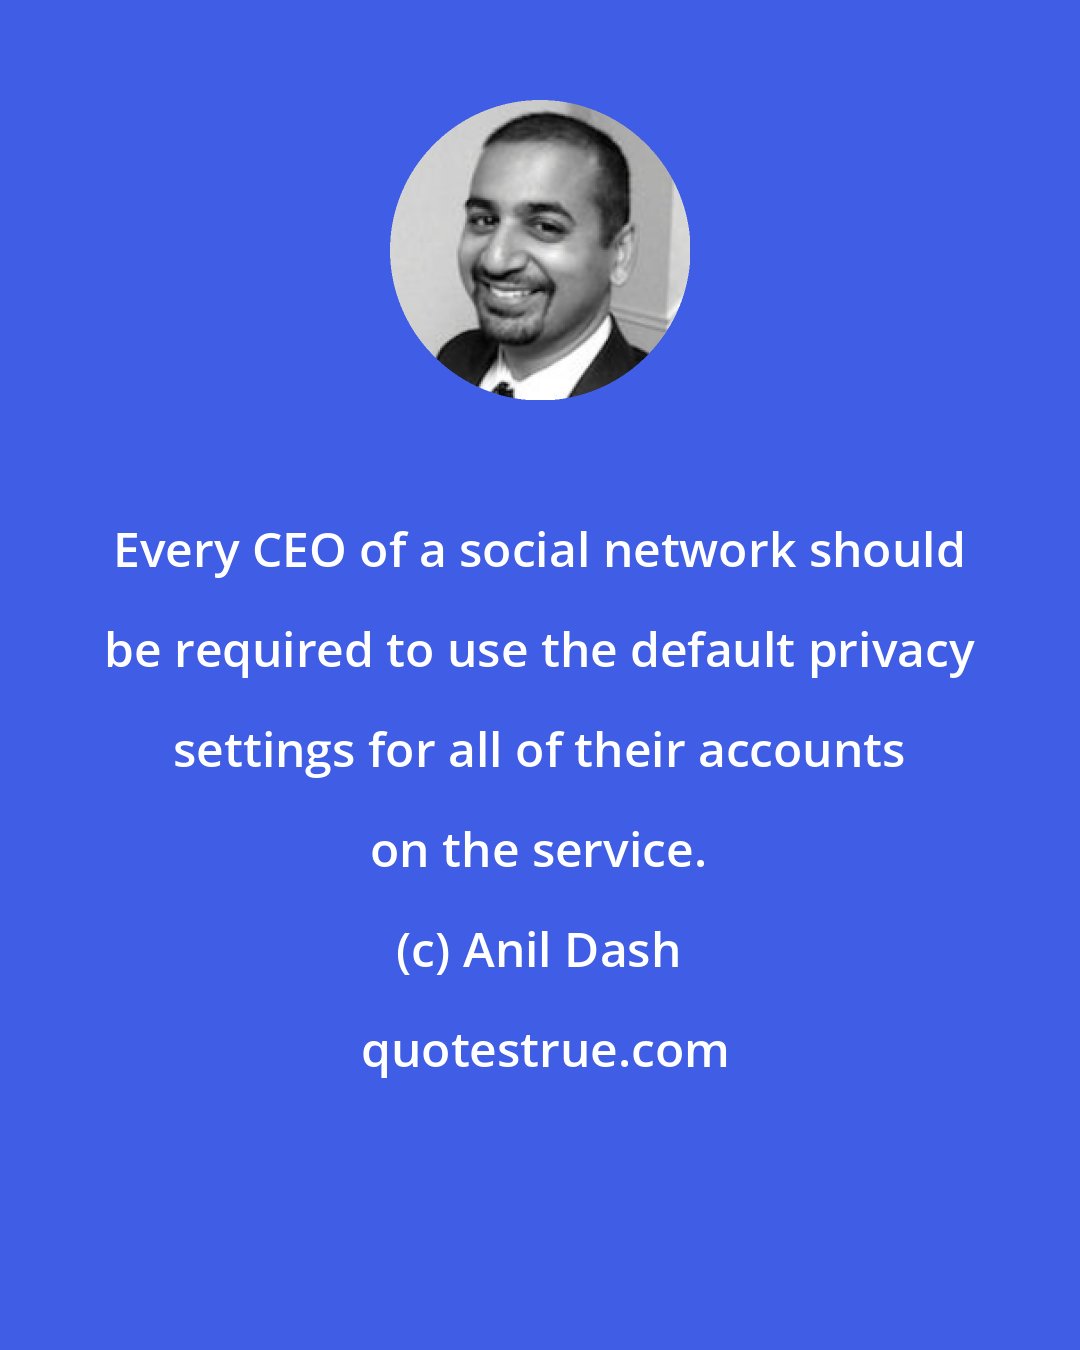 Anil Dash: Every CEO of a social network should be required to use the default privacy settings for all of their accounts on the service.